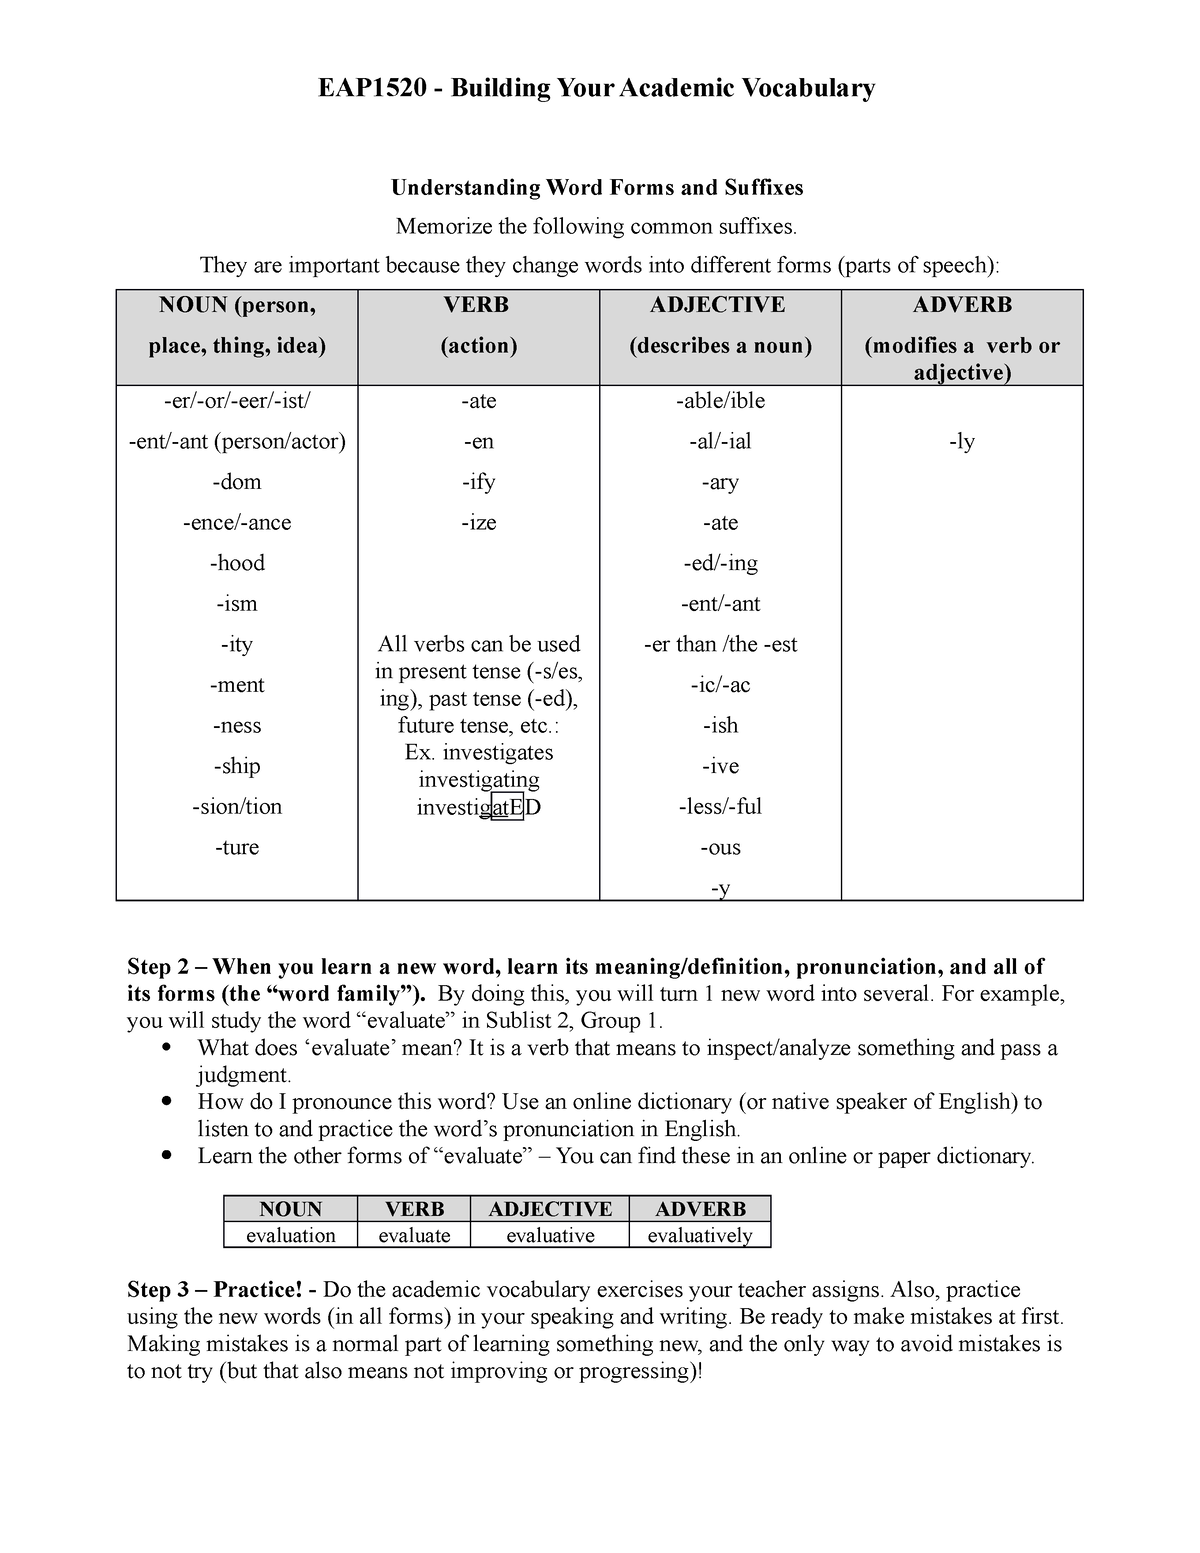 1520 Understanding Word Forms and Suffixes - EAP1520 - Building Your ...